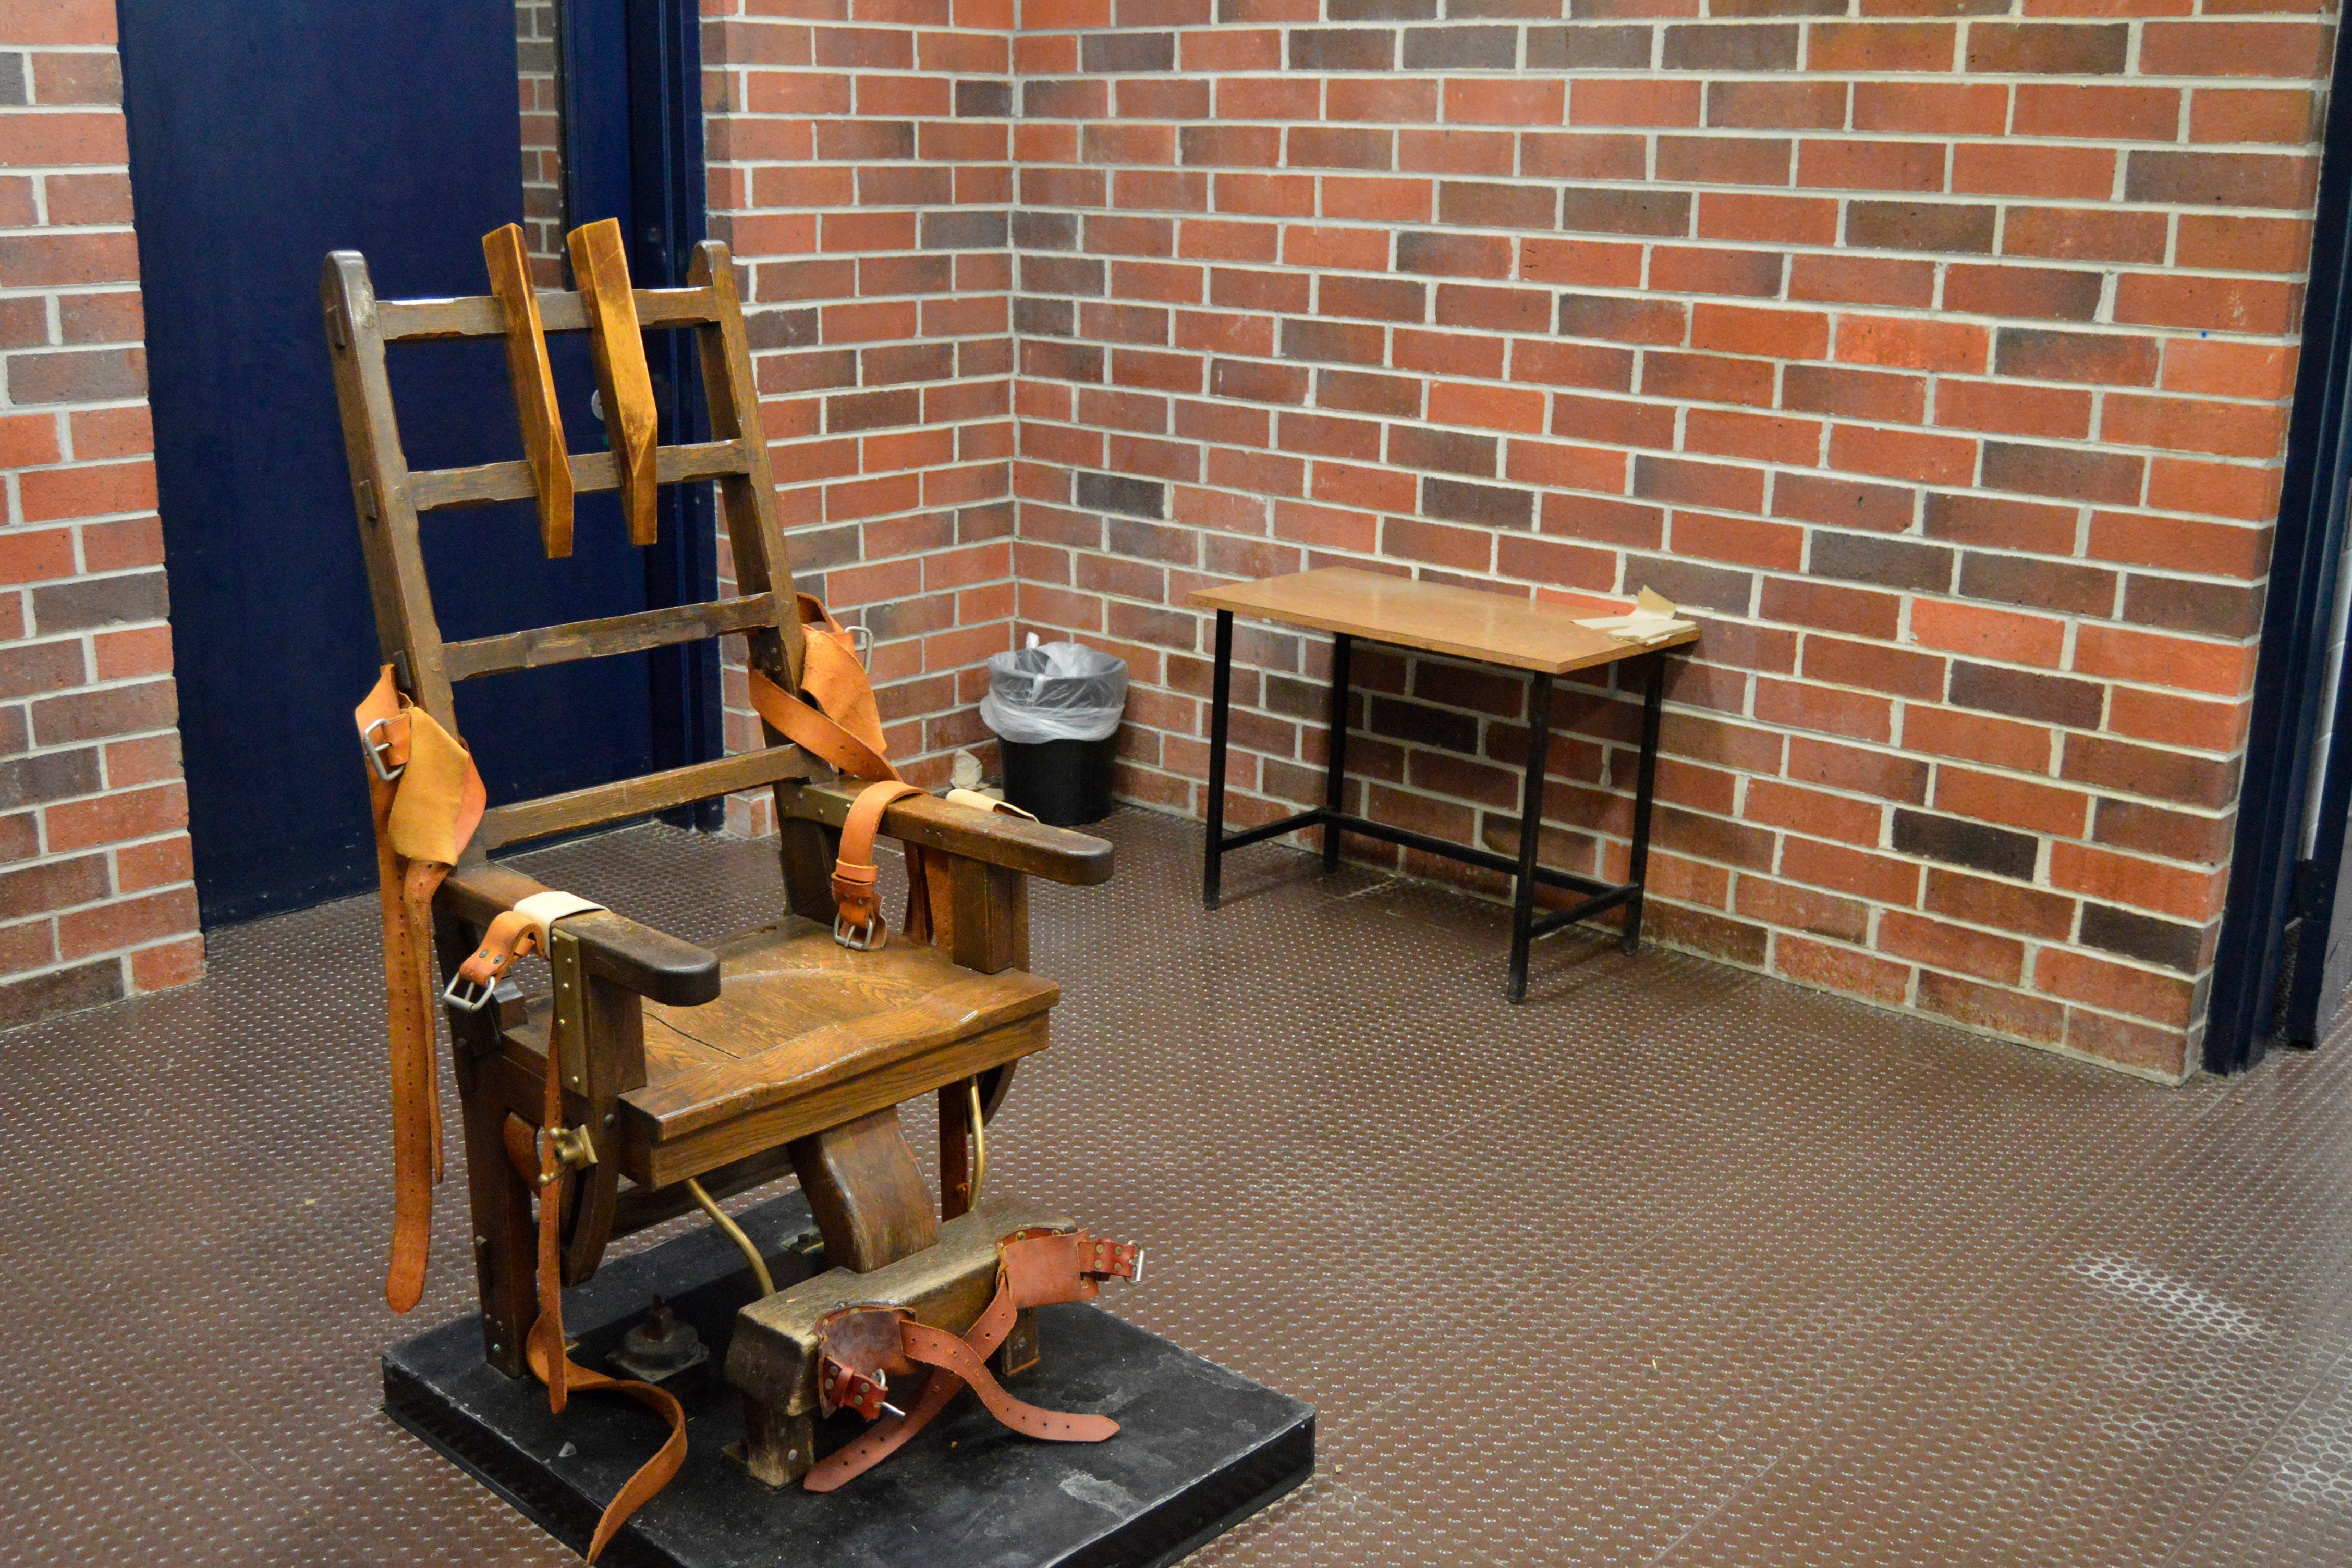 File image: This March 2019 file photo provided by the South Carolina Department of Corrections shows the state's electric chair in Columbia, SC. Two South Carolina inmates scheduled to die want an appellate court to halt their deaths by electrocution